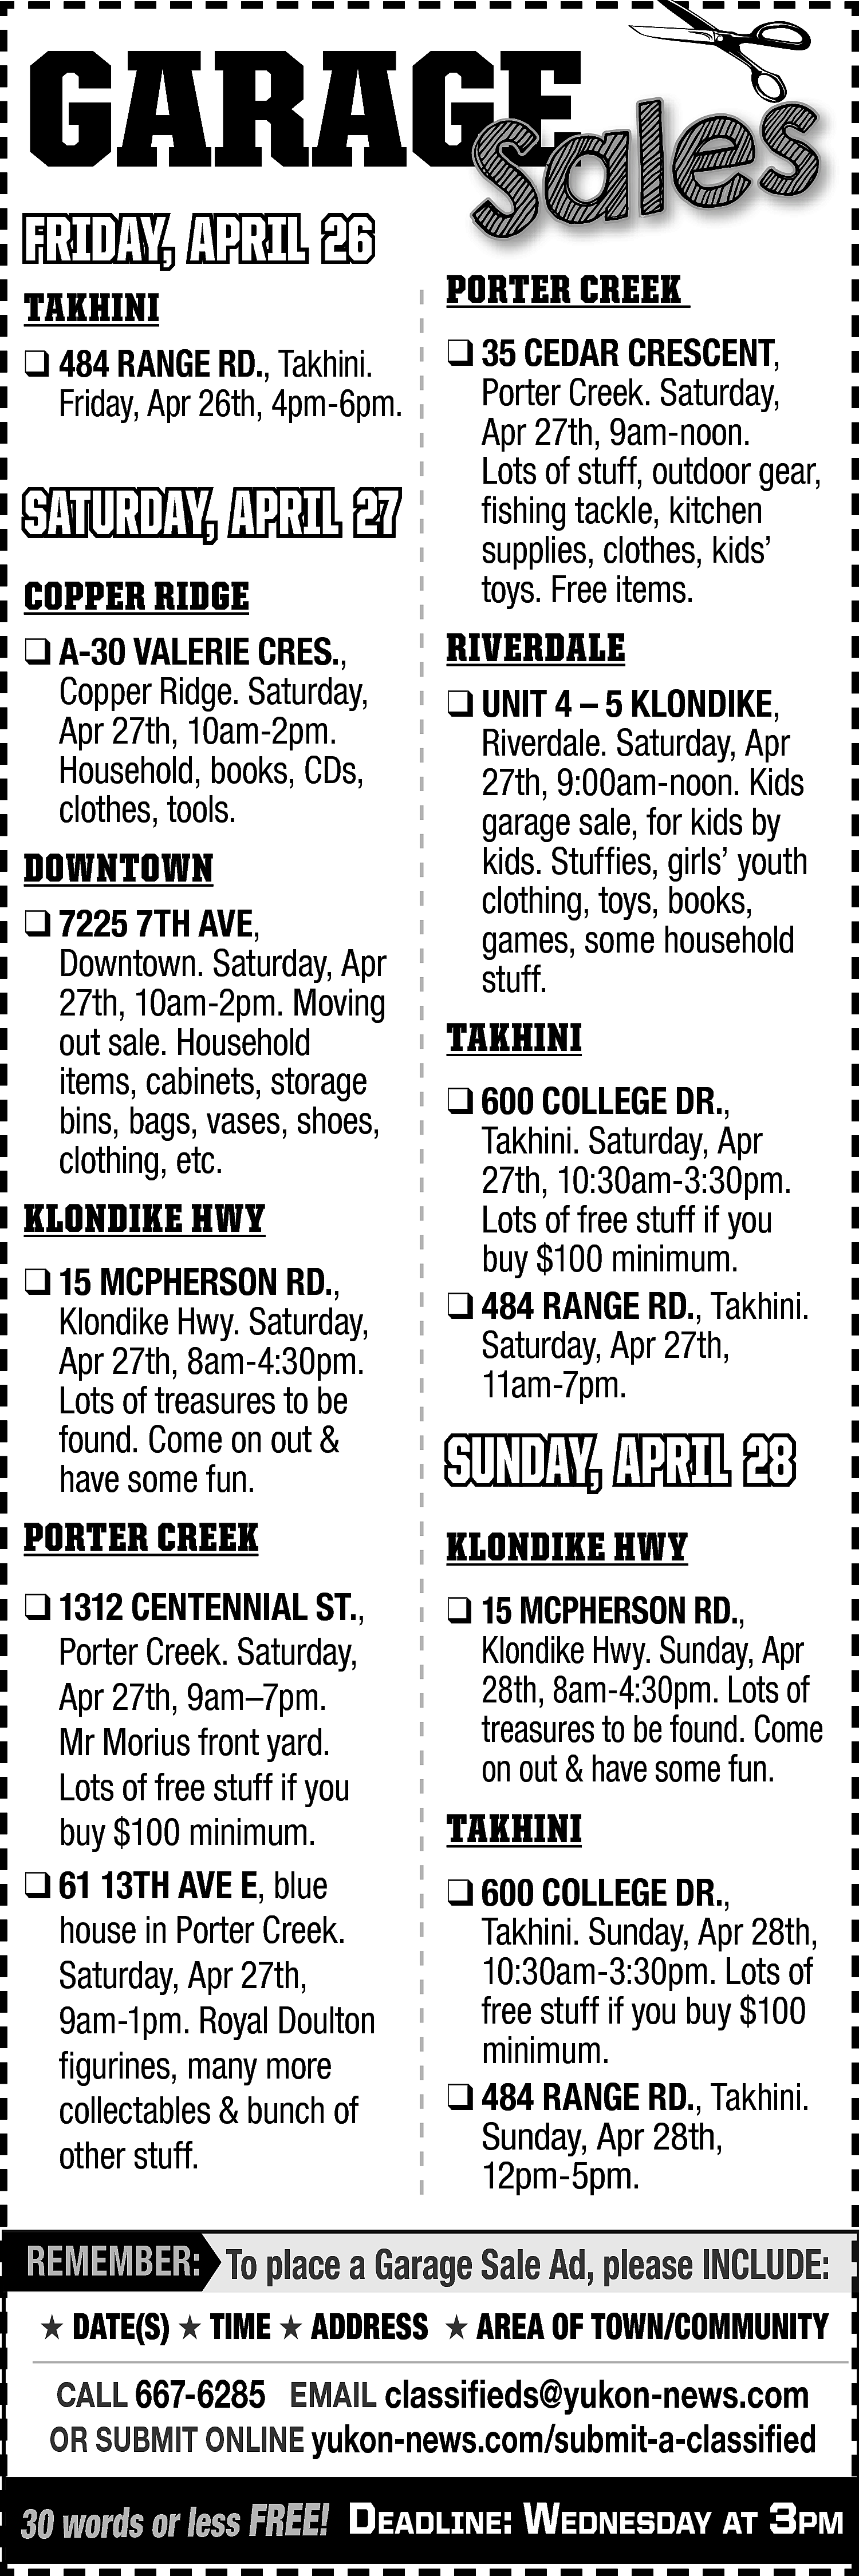 GARAGE <br>GE <br>Sales <br> <br>FRIDAY,  GARAGE  GE  Sales    FRIDAY, APRIL 26  TAKHINI    ❑ 484 RANGE RD., Takhini.  Friday, Apr 26th, 4pm-6pm.    SATURDAY, APRIL 27  COPPER RIDGE  ❑ A-30 VALERIE CRES.,  Copper Ridge. Saturday,  Apr 27th, 10am-2pm.  Household, books, CDs,  clothes, tools.    DOWNTOWN  ❑ 7225 7TH AVE,  Downtown. Saturday, Apr  27th, 10am-2pm. Moving  out sale. Household  items, cabinets, storage  bins, bags, vases, shoes,  clothing, etc.    KLONDIKE HWY  ❑ 15 MCPHERSON RD.,  Klondike Hwy. Saturday,  Apr 27th, 8am-4:30pm.  Lots of treasures to be  found. Come on out &  have some fun.    PORTER CREEK    ❑ 35 CEDAR CRESCENT,  Porter Creek. Saturday,  Apr 27th, 9am-noon.  Lots of stuff, outdoor gear,  fishing tackle, kitchen  supplies, clothes, kids’  toys. Free items.    RIVERDALE  ❑ UNIT 4 – 5 KLONDIKE,  Riverdale. Saturday, Apr  27th, 9:00am-noon. Kids  garage sale, for kids by  kids. Stuffies, girls’ youth  clothing, toys, books,  games, some household  stuff.    TAKHINI  ❑ 600 COLLEGE DR.,  Takhini. Saturday, Apr  27th, 10:30am-3:30pm.  Lots of free stuff if you  buy $100 minimum.  ❑ 484 RANGE RD., Takhini.  Saturday, Apr 27th,  11am-7pm.    SUNDAY, APRIL 28    PORTER CREEK    KLONDIKE HWY    ❑ 1312 CENTENNIAL ST.,  Porter Creek. Saturday,  Apr 27th, 9am–7pm.  Mr Morius front yard.  Lots of free stuff if you  buy $100 minimum.  ❑ 61 13TH AVE E, blue  house in Porter Creek.  Saturday, Apr 27th,  9am-1pm. Royal Doulton  figurines, many more  collectables & bunch of  other stuff.    ❑ 15 MCPHERSON RD.,  Klondike Hwy. Sunday, Apr  28th, 8am-4:30pm. Lots of  treasures to be found. Come  on out & have some fun.    TAKHINI  ❑ 600 COLLEGE DR.,  Takhini. Sunday, Apr 28th,  10:30am-3:30pm. Lots of  free stuff if you buy $100  minimum.  ❑ 484 RANGE RD., Takhini.  Sunday, Apr 28th,  12pm-5pm.    REMEMBER: To place a Garage Sale Ad, please INCLUDE:  ★ DATE(S) ★ TIME ★ ADDRESS ★ AREA OF TOWN/COMMUNITY    CALL 667-6285 EMAIL classifieds@yukon-news.com  OR SUBMIT ONLINE yukon-news.com/submit-a-classified    30 words or less FREE! DeaDline: WeDnesDay at 3pm    